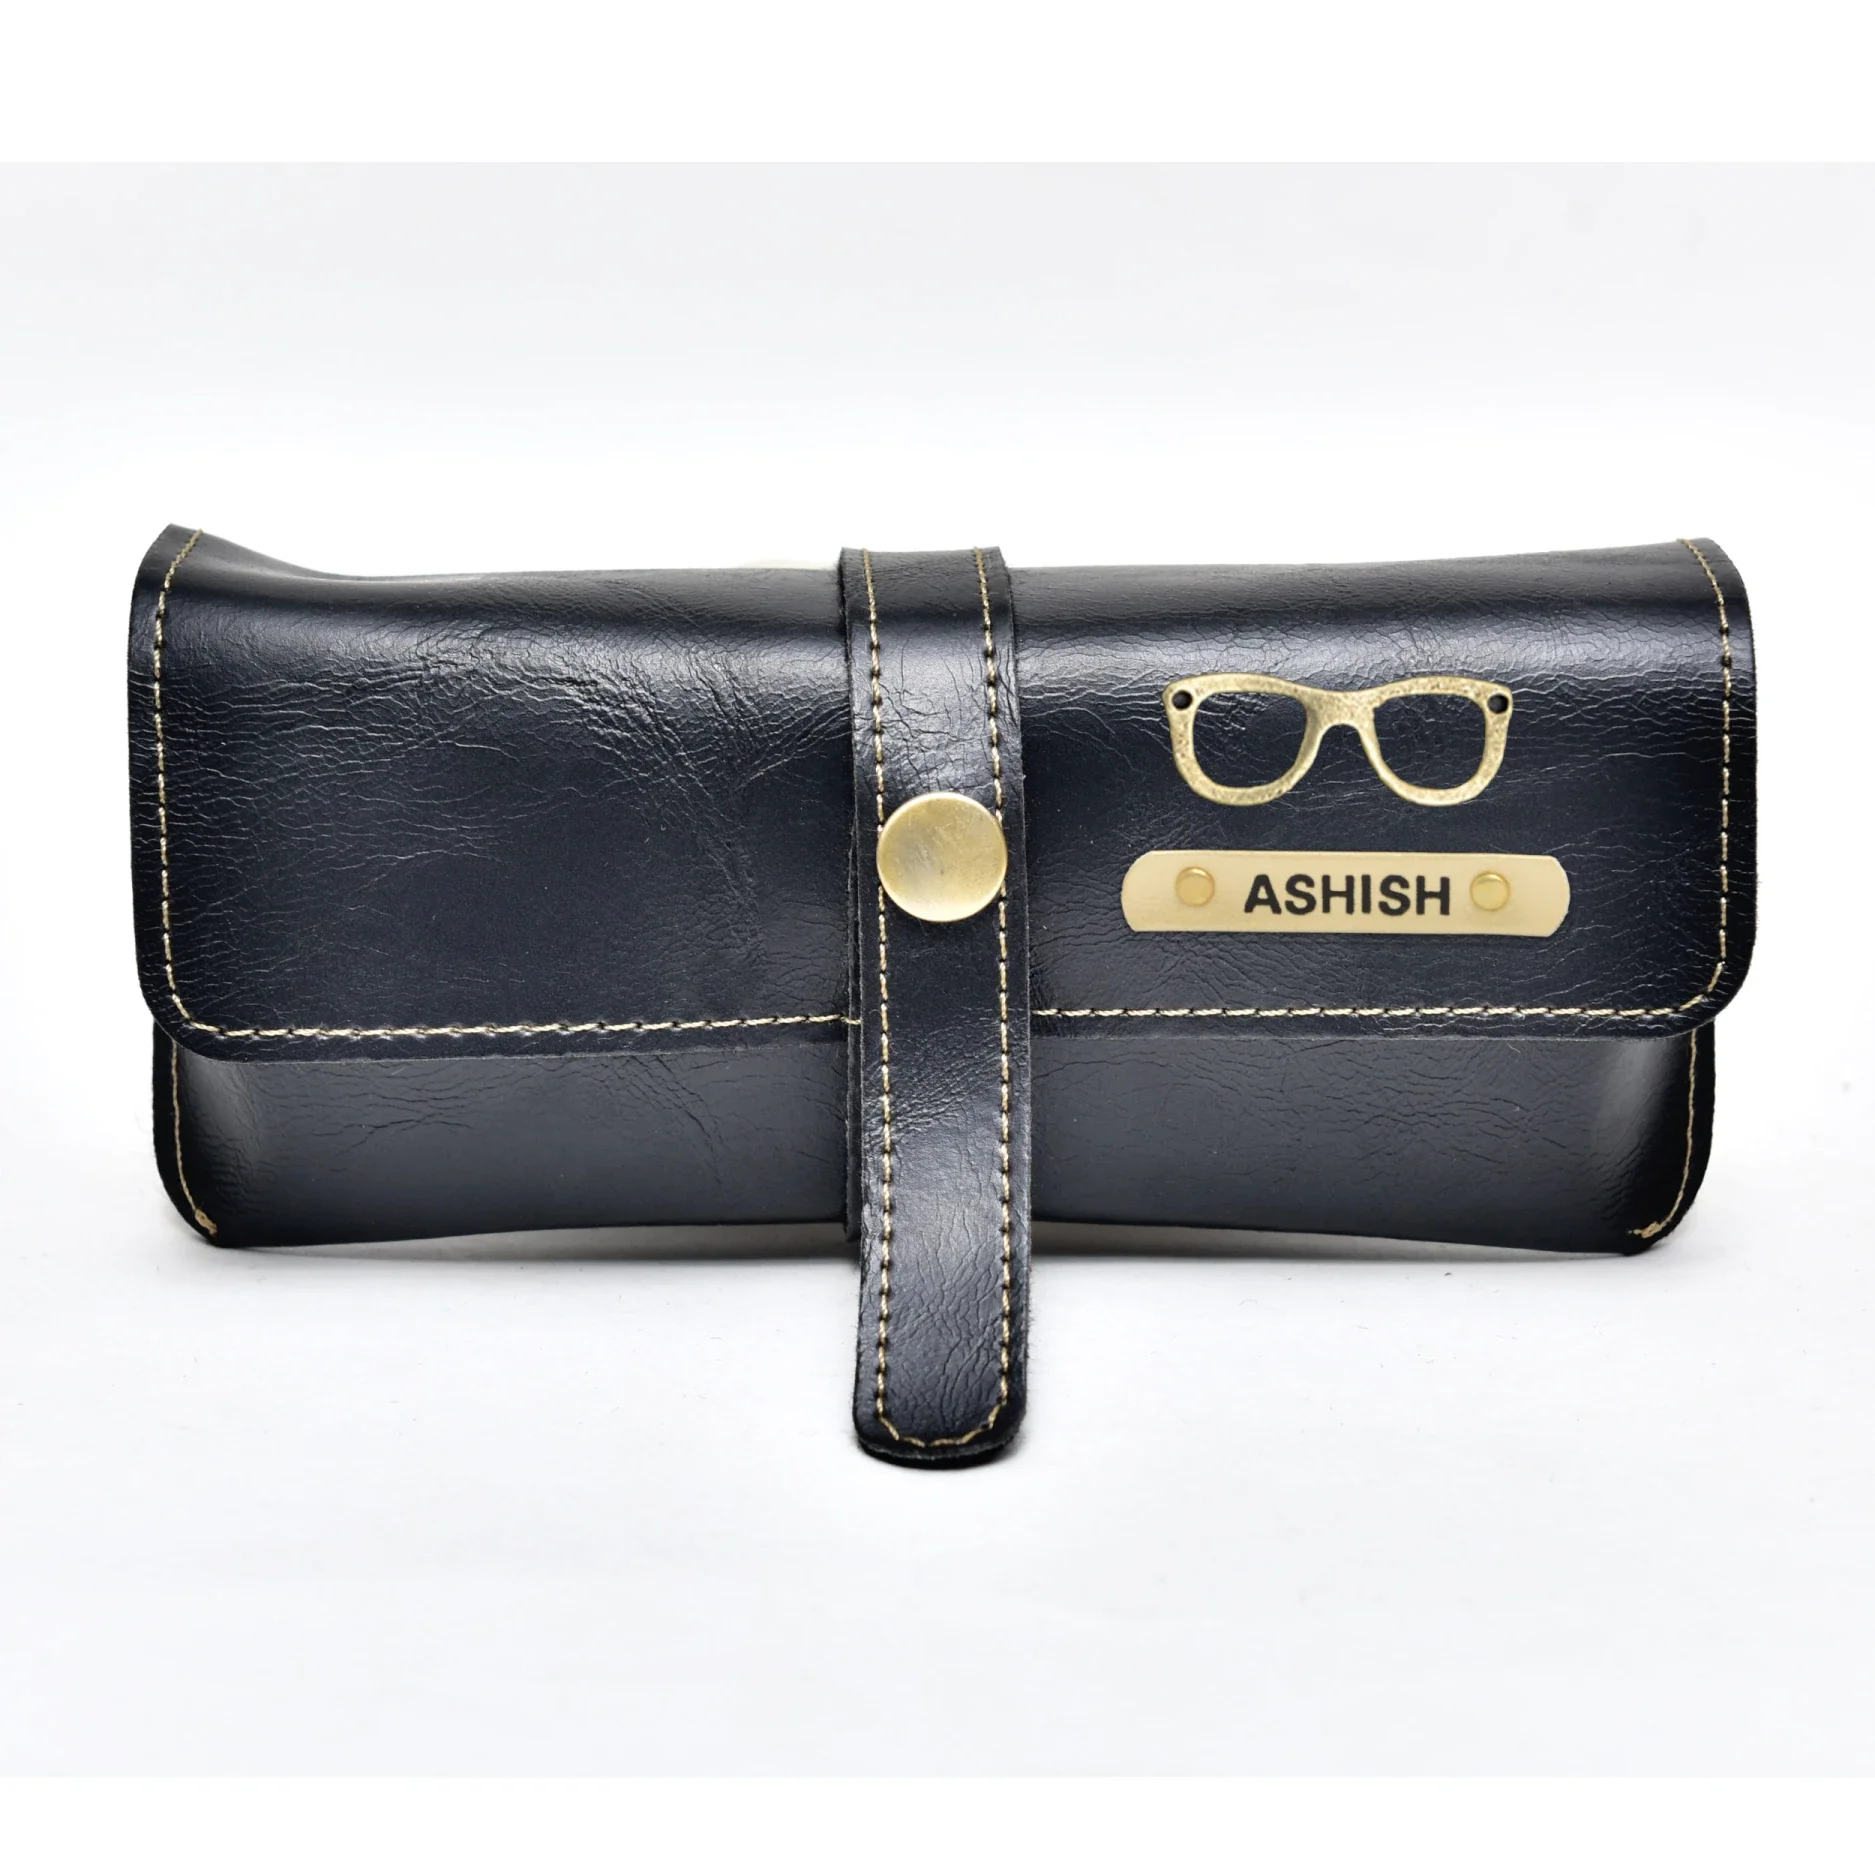 Our eyewear case features a sturdy zipper and soft lining to ensure your glasses stay safe and secure.